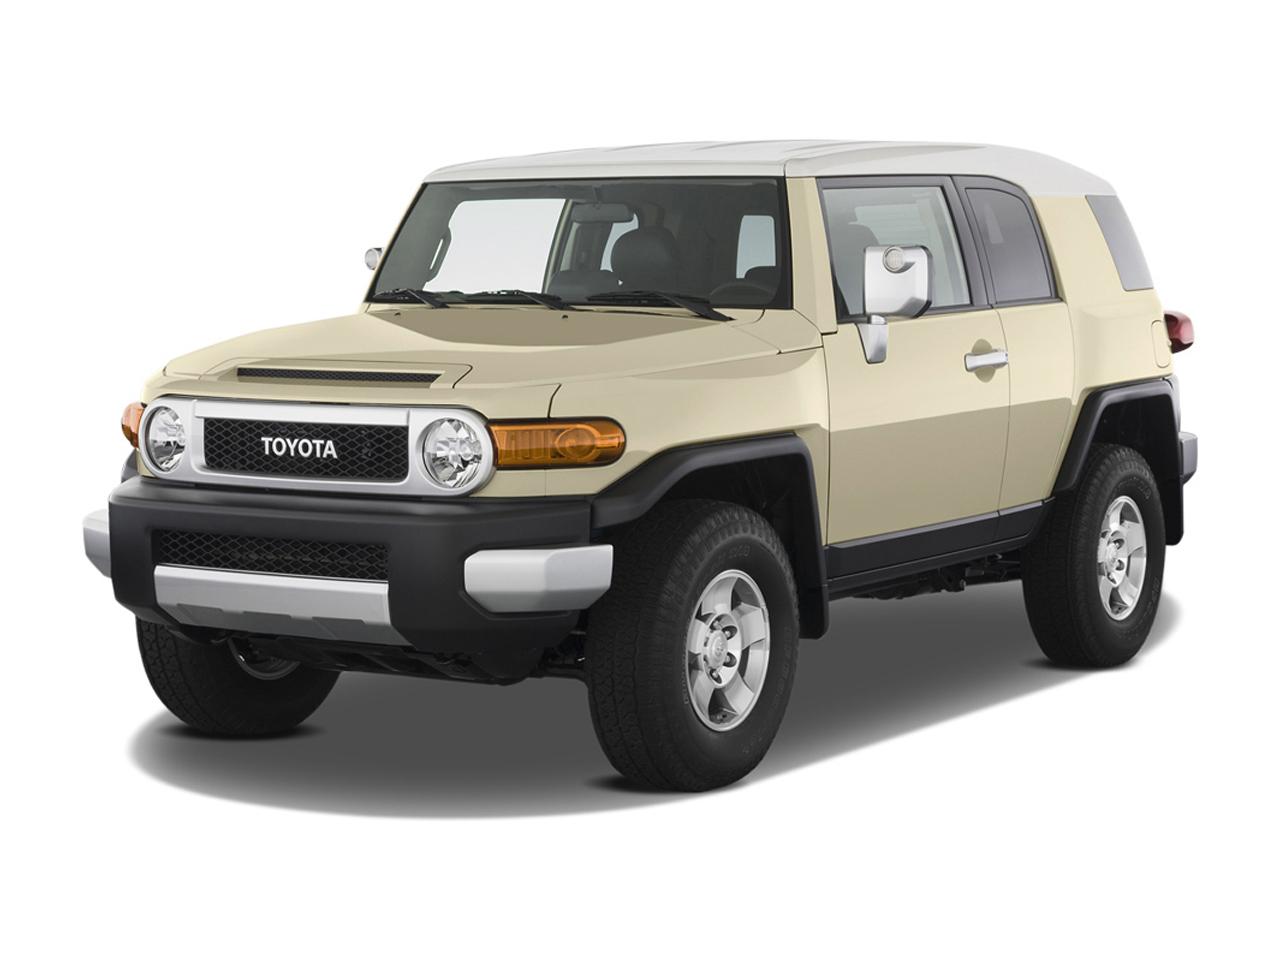 2010 Toyota Fj Cruiser Review Ratings Specs Prices And Photos